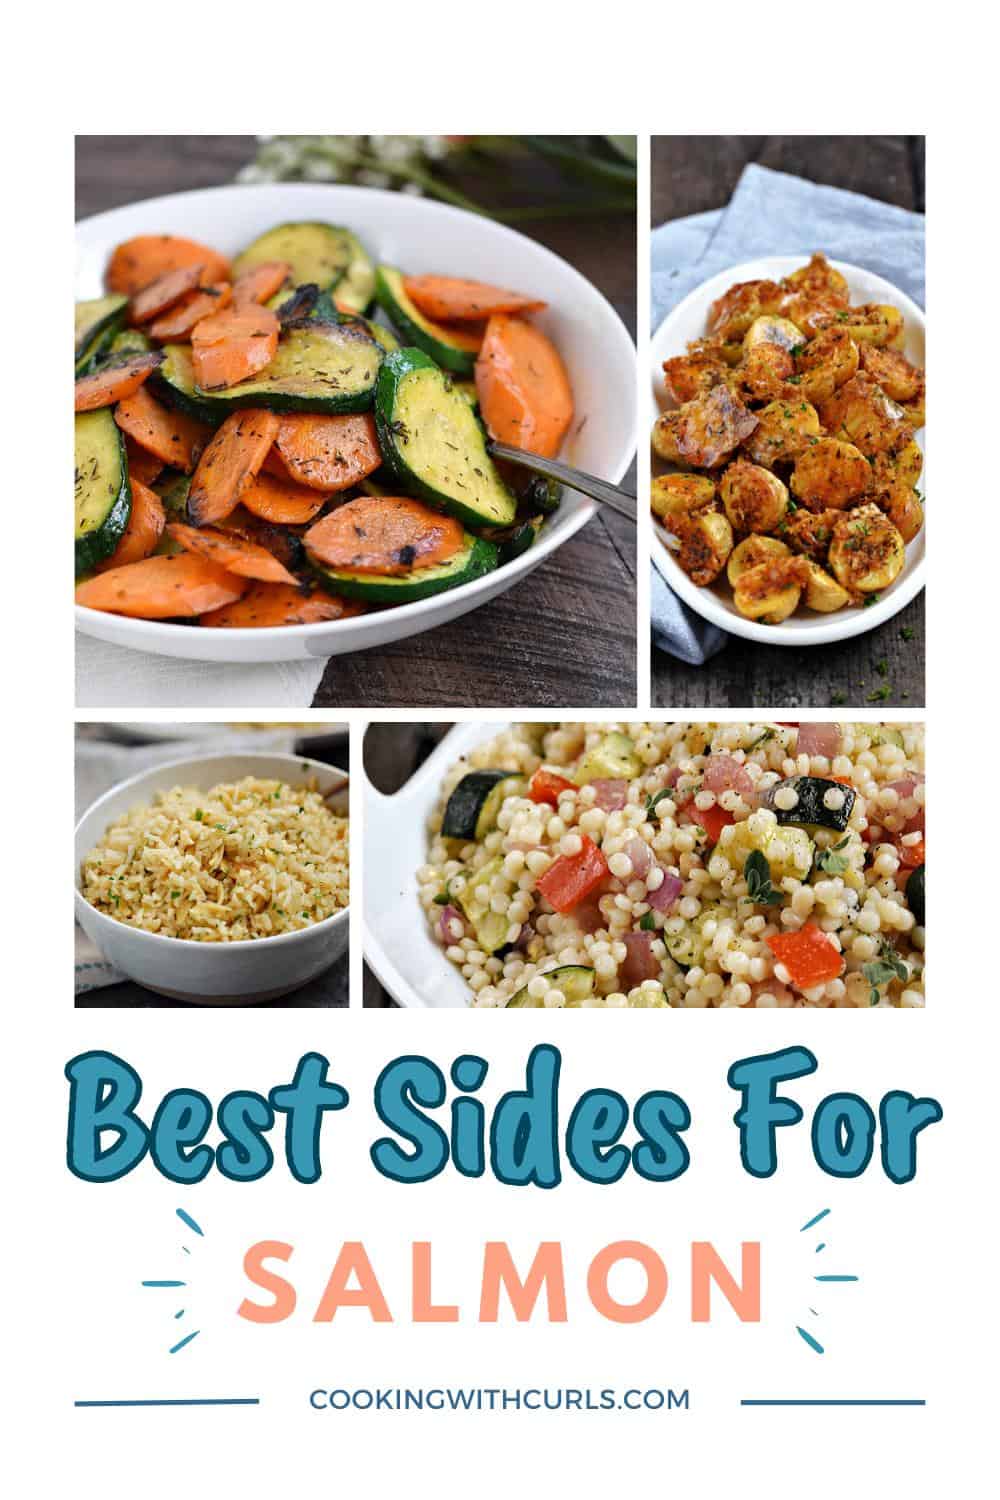 Collage showing four side dish images with title graphic across the bottom.